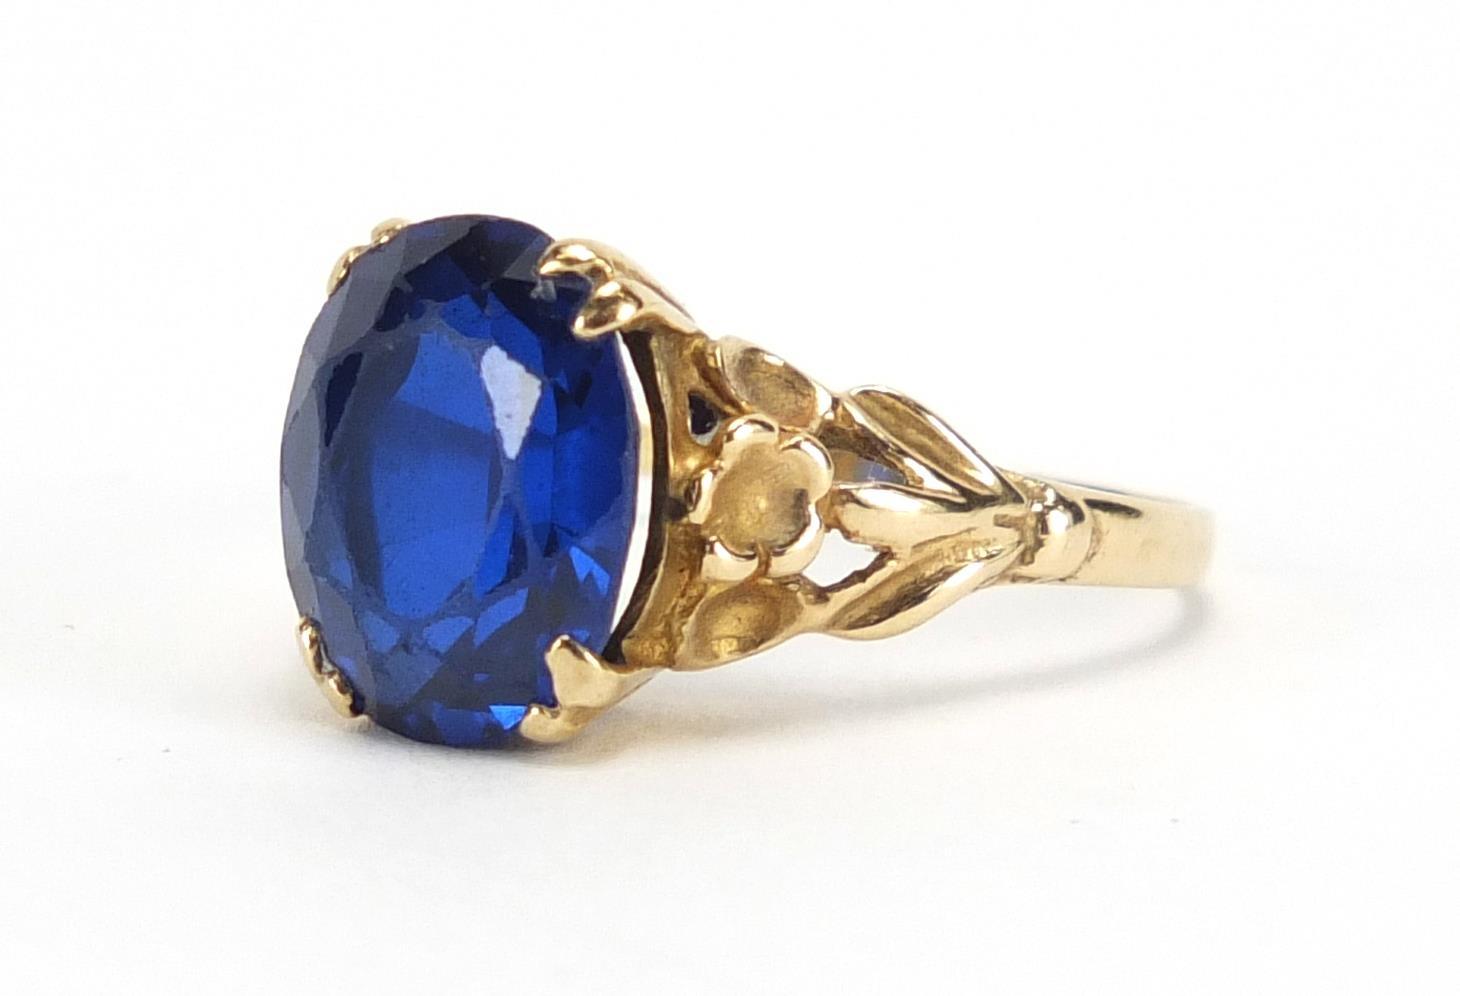 9ct gold blue stone solitaire ring, size O, approximate weight 3.6g : For Extra Condition Reports